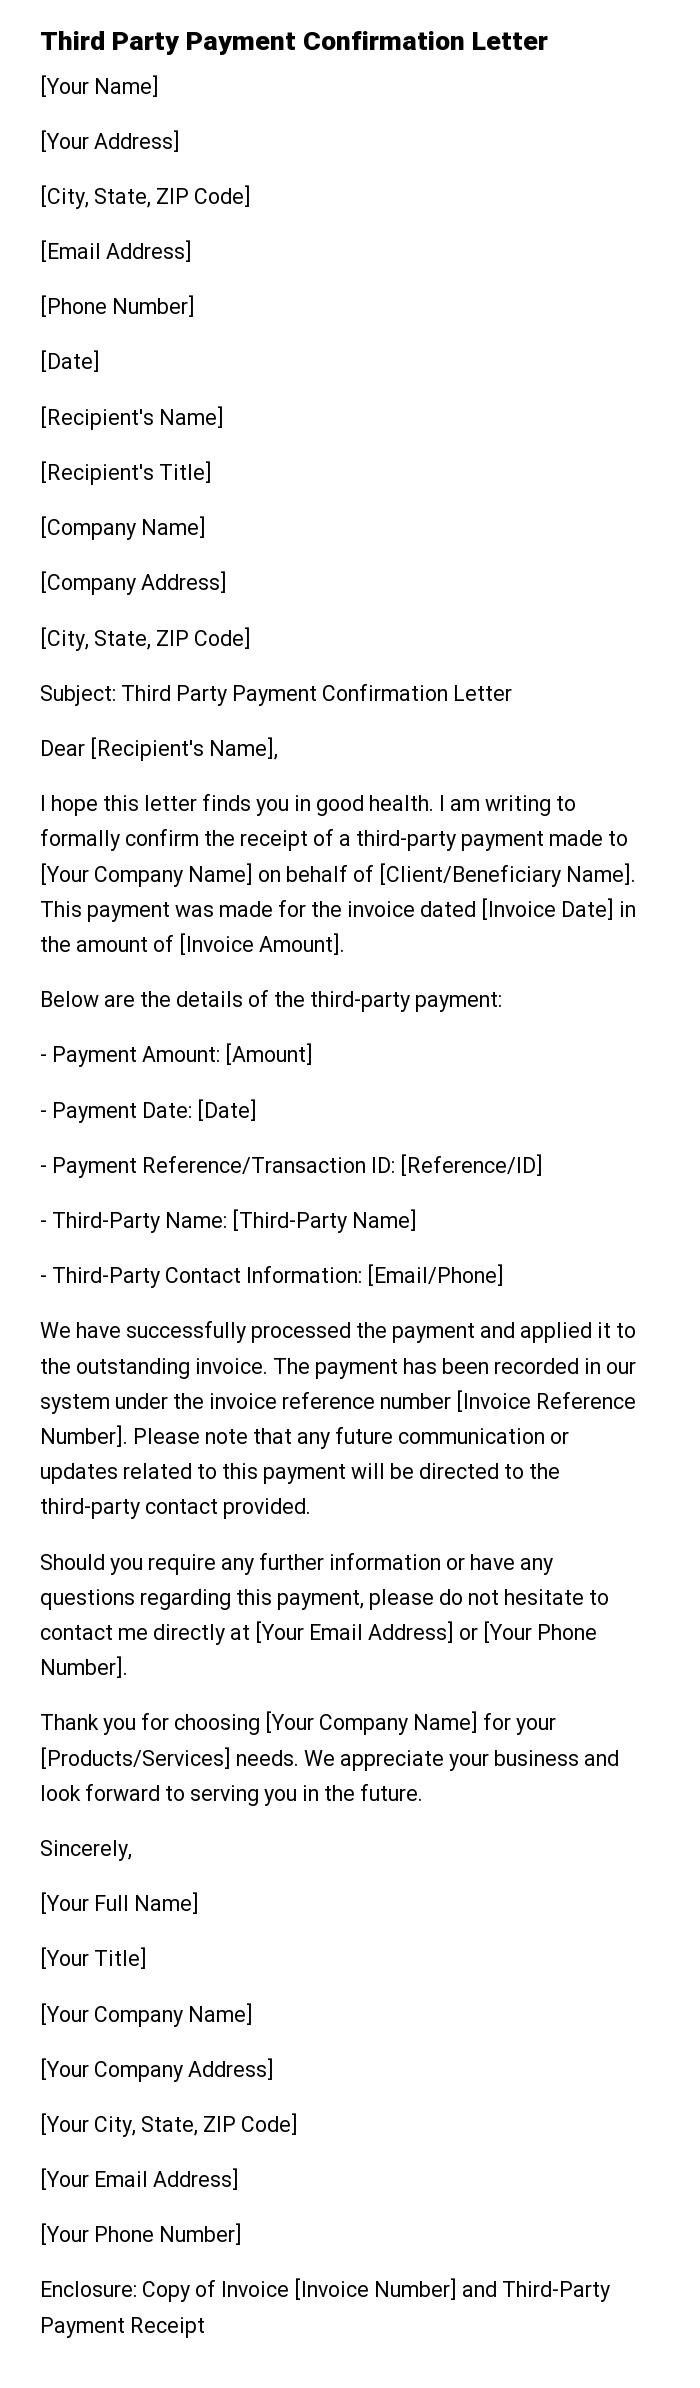 Third Party Payment Confirmation Letter